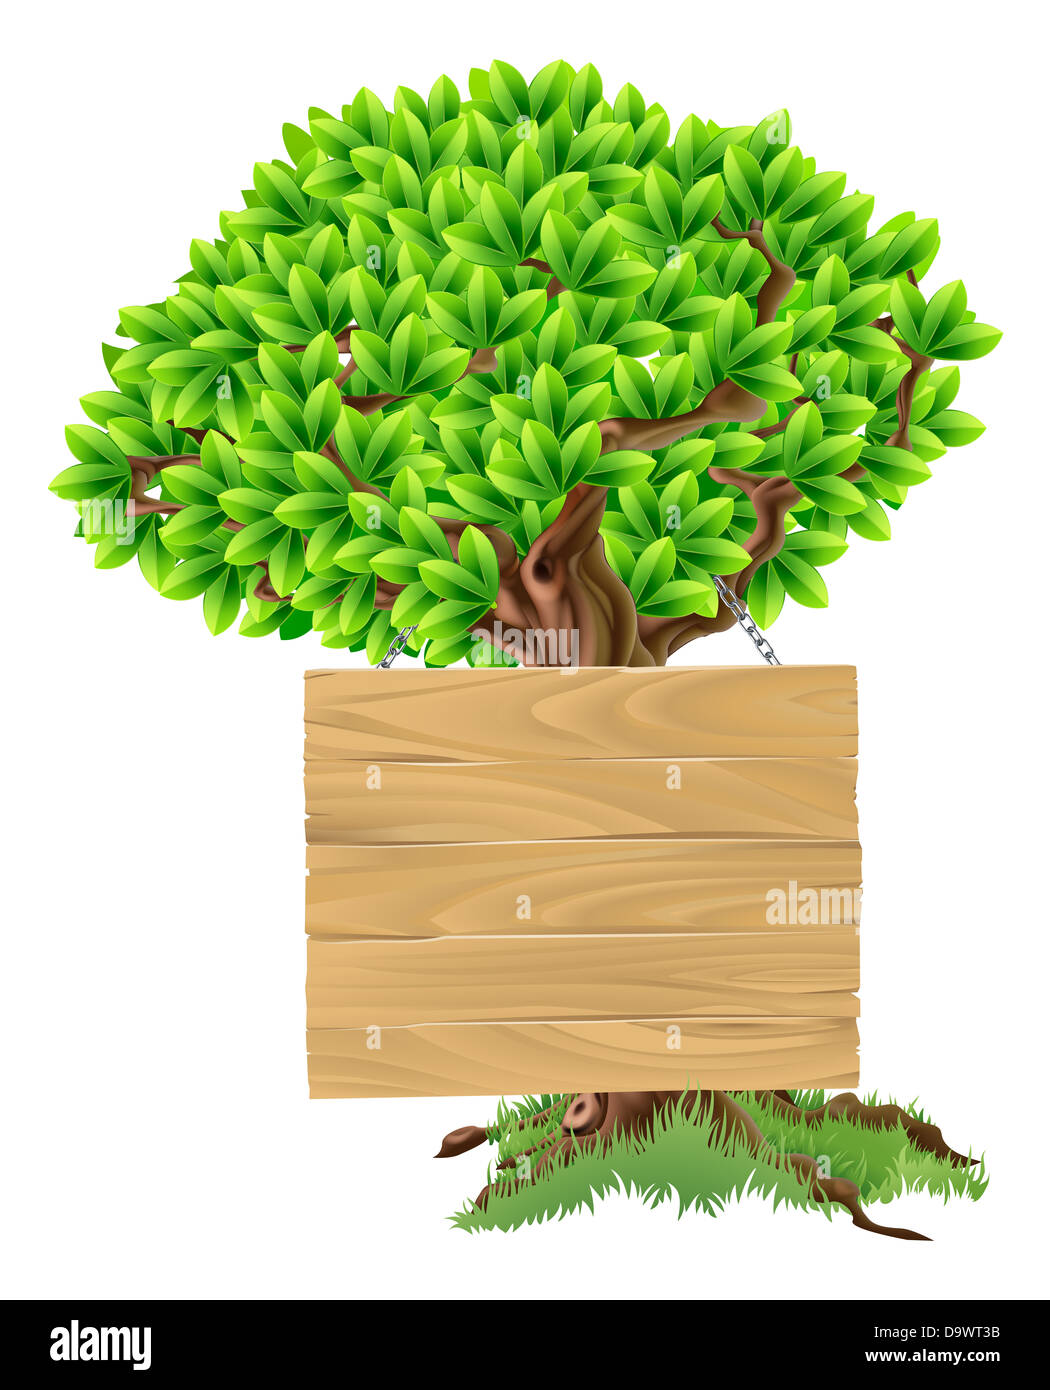 Illustration of a bright green tree with a wooden sign suspended from it Stock Photo